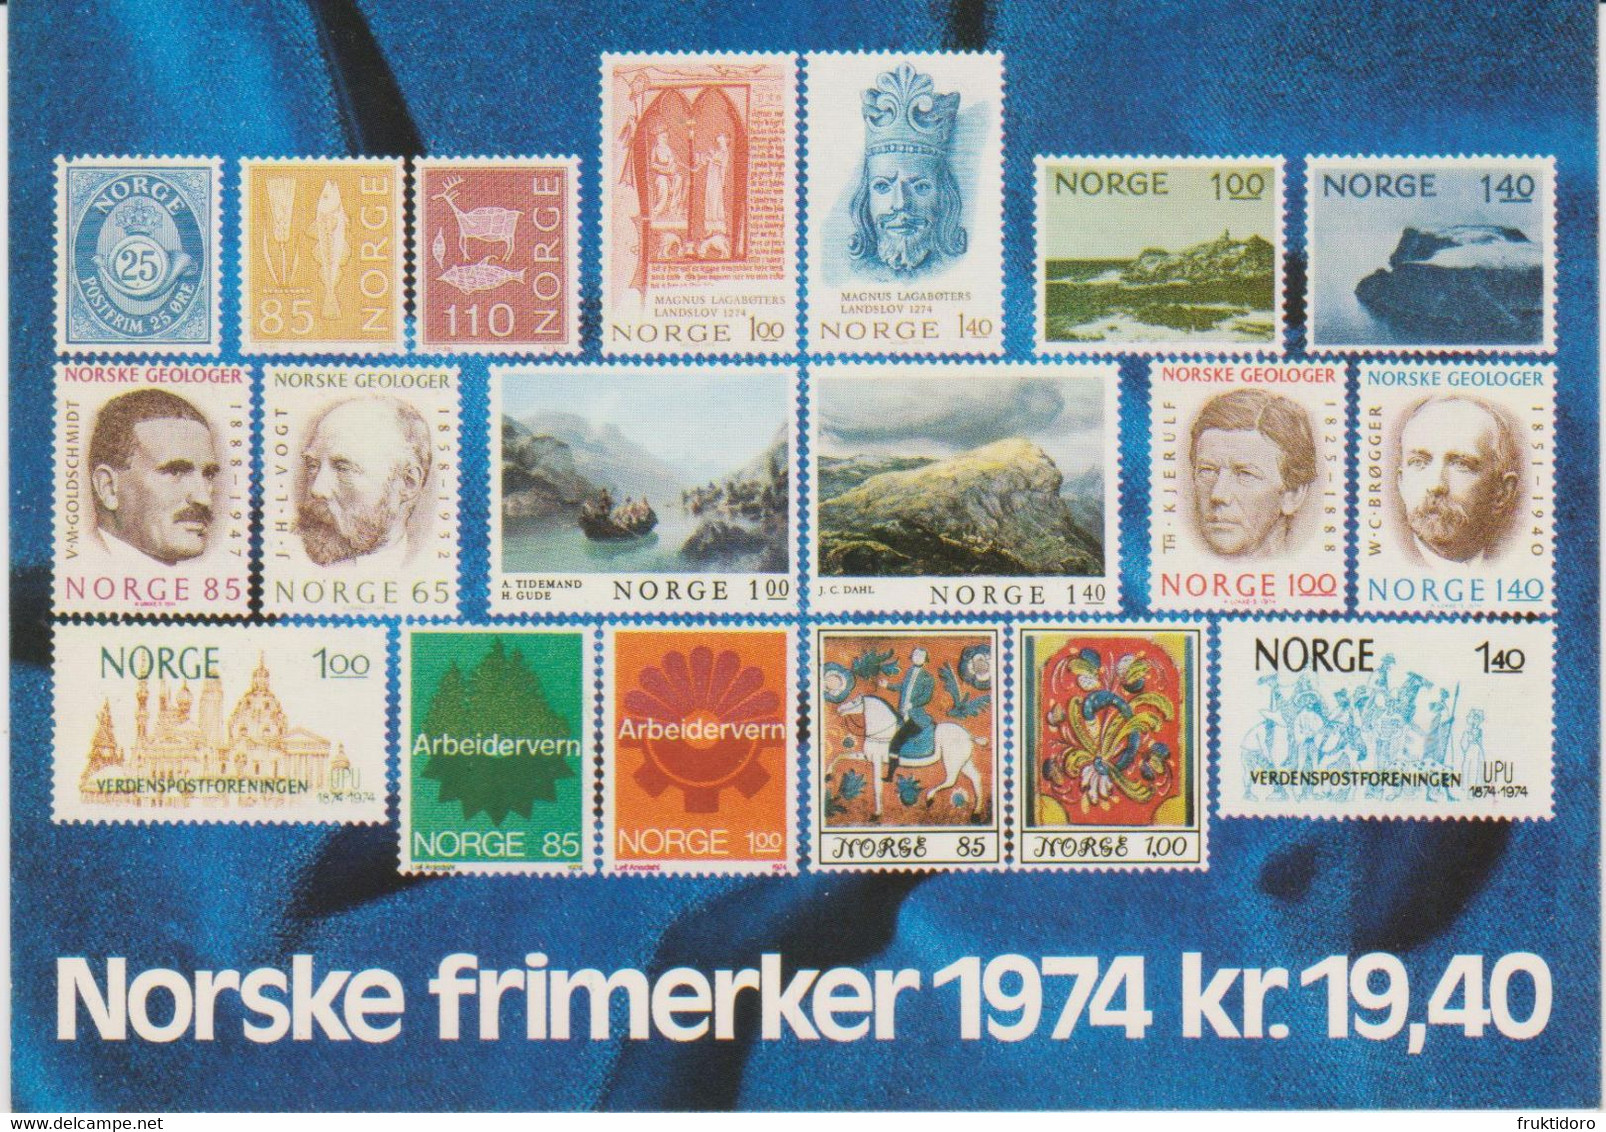 Norway Year Set Norwegian Stamps 1974 - Posthorn - North Cape - Magnus Lagabøte's State Law - Industrial Safety ** - Años Completos